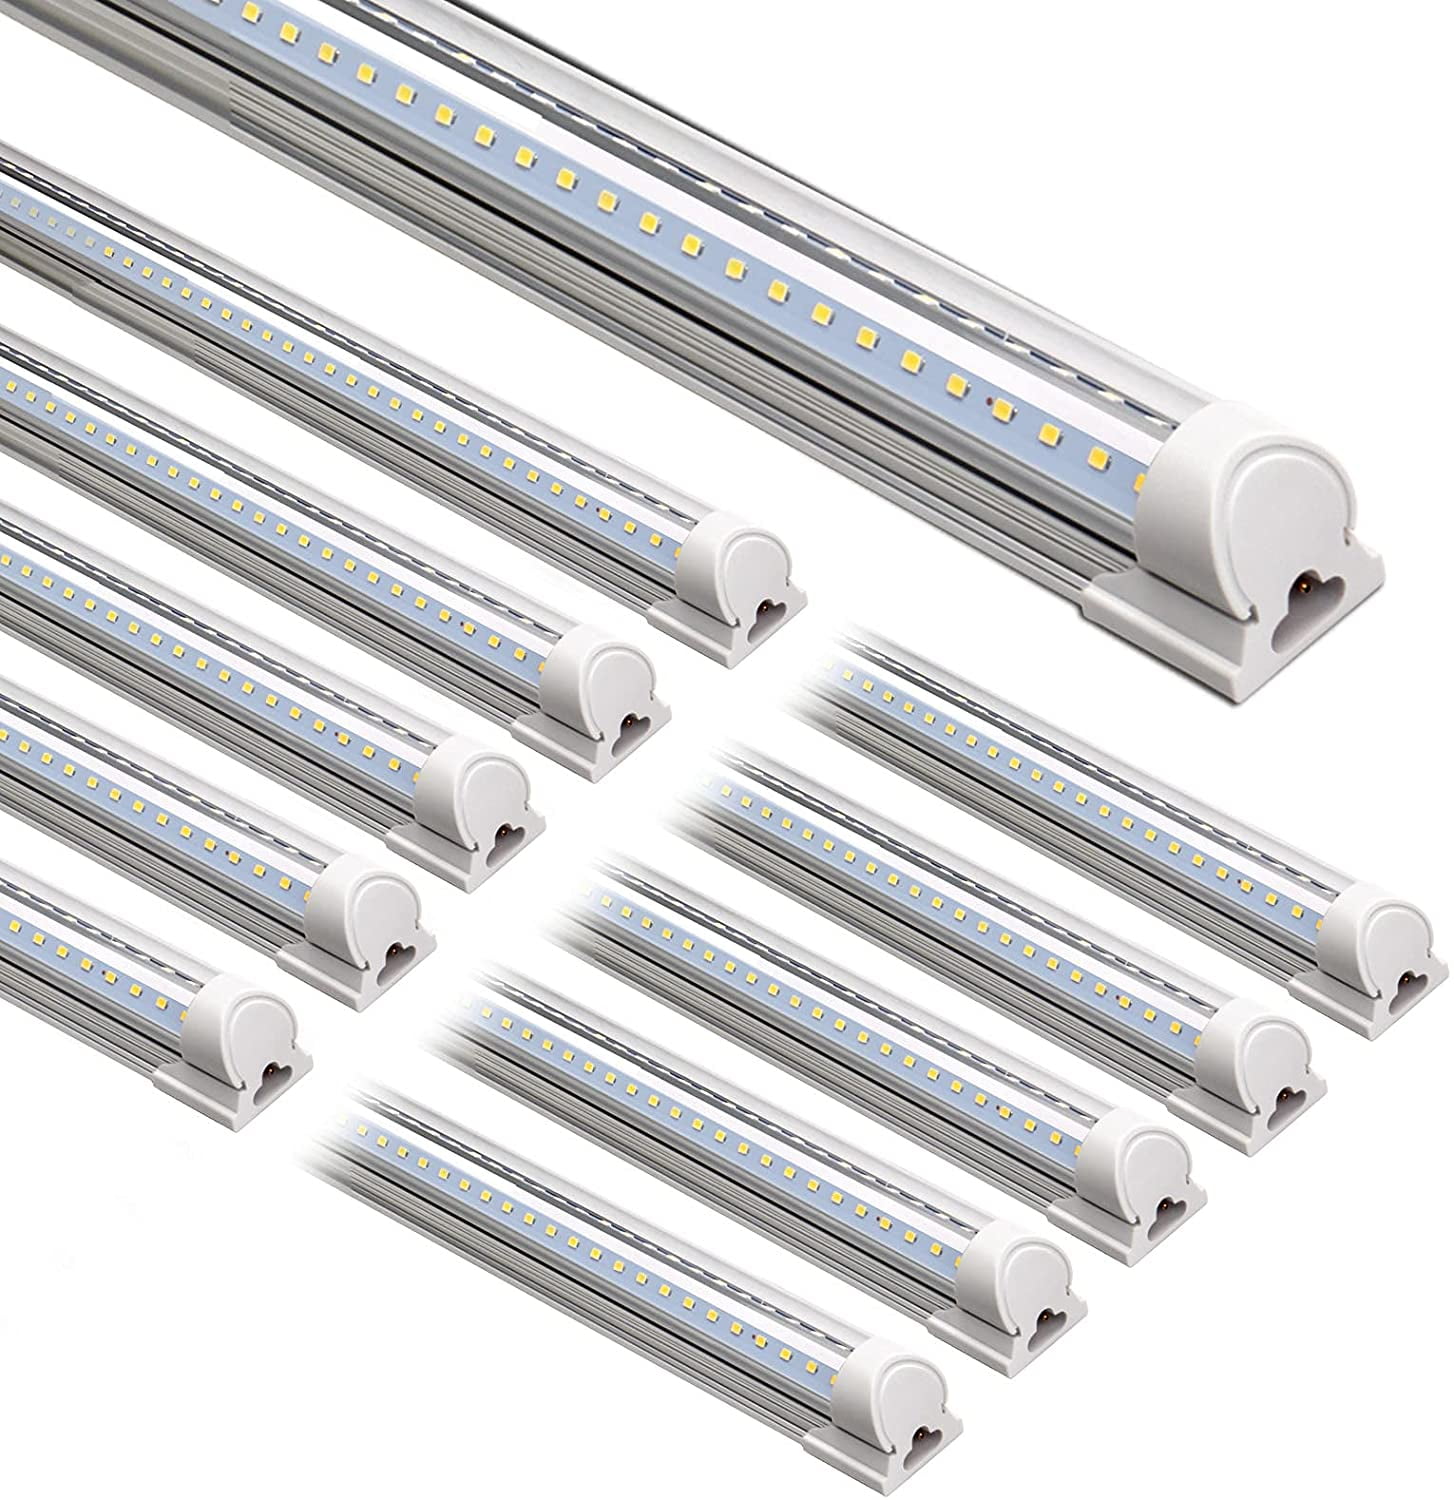 HyperSelect Utility LED Shop Light 100W Eq. Crystal White Glow 4FT Integrated LED Fixture Garage Light 3800 Lumens 35W 5000K Corded-electric Hyperikon VC0S2_922141051 Frosted Cover DLC 4.2 Premium Qualified